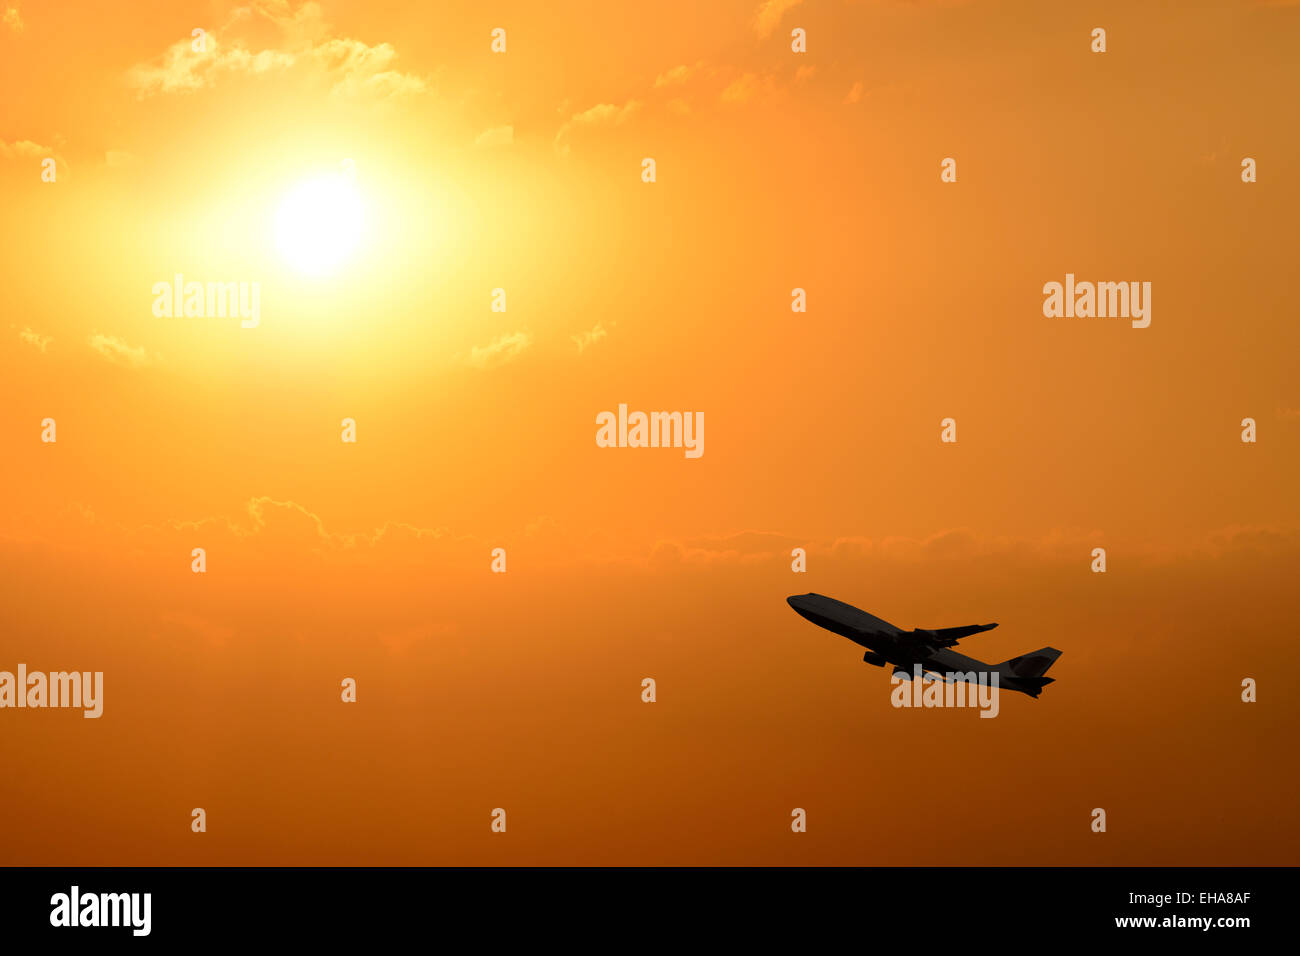 Airplane Taking Off Silhouetted Against a Sunset. Stock Photo